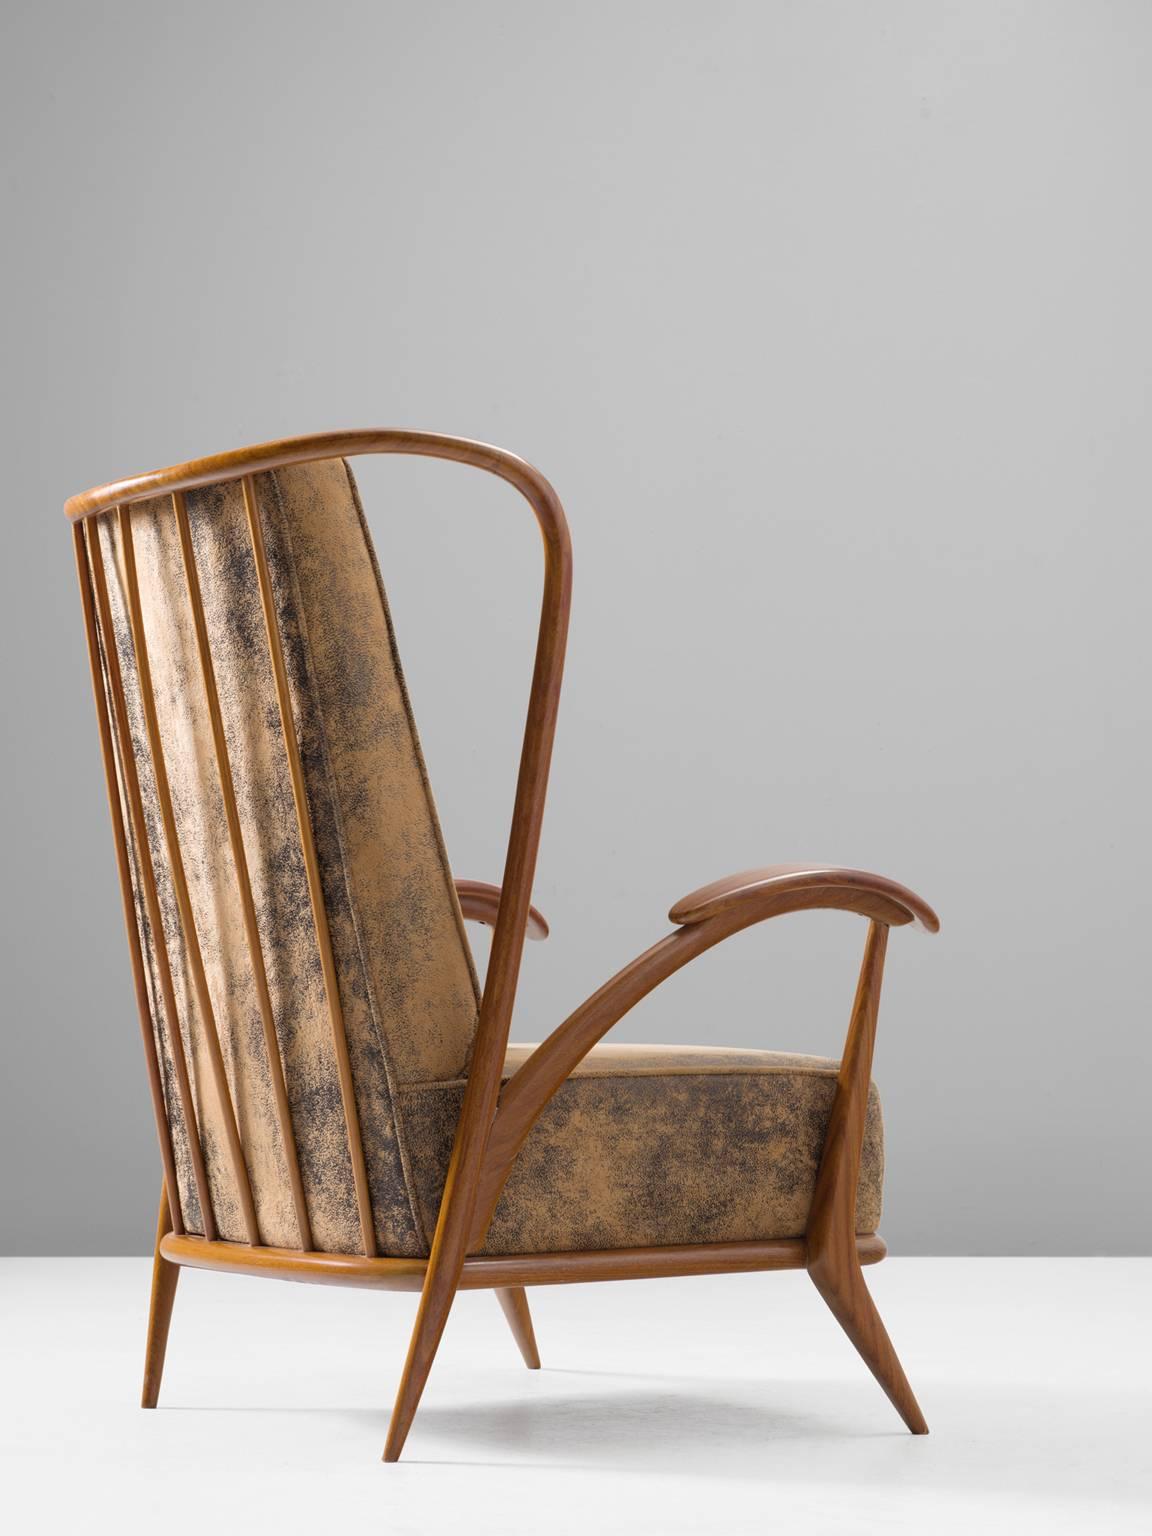 Giuseppi Scapinelli, lounge chair in rosewood and suede, 1950s, Brazil.

Giuseppi Scapinelli (1891-1982) was a designer, furniture maker and dealer in Sao Paulo. Scapinelli, born in Italy, was a designer who was on top of the zeitgeist. His